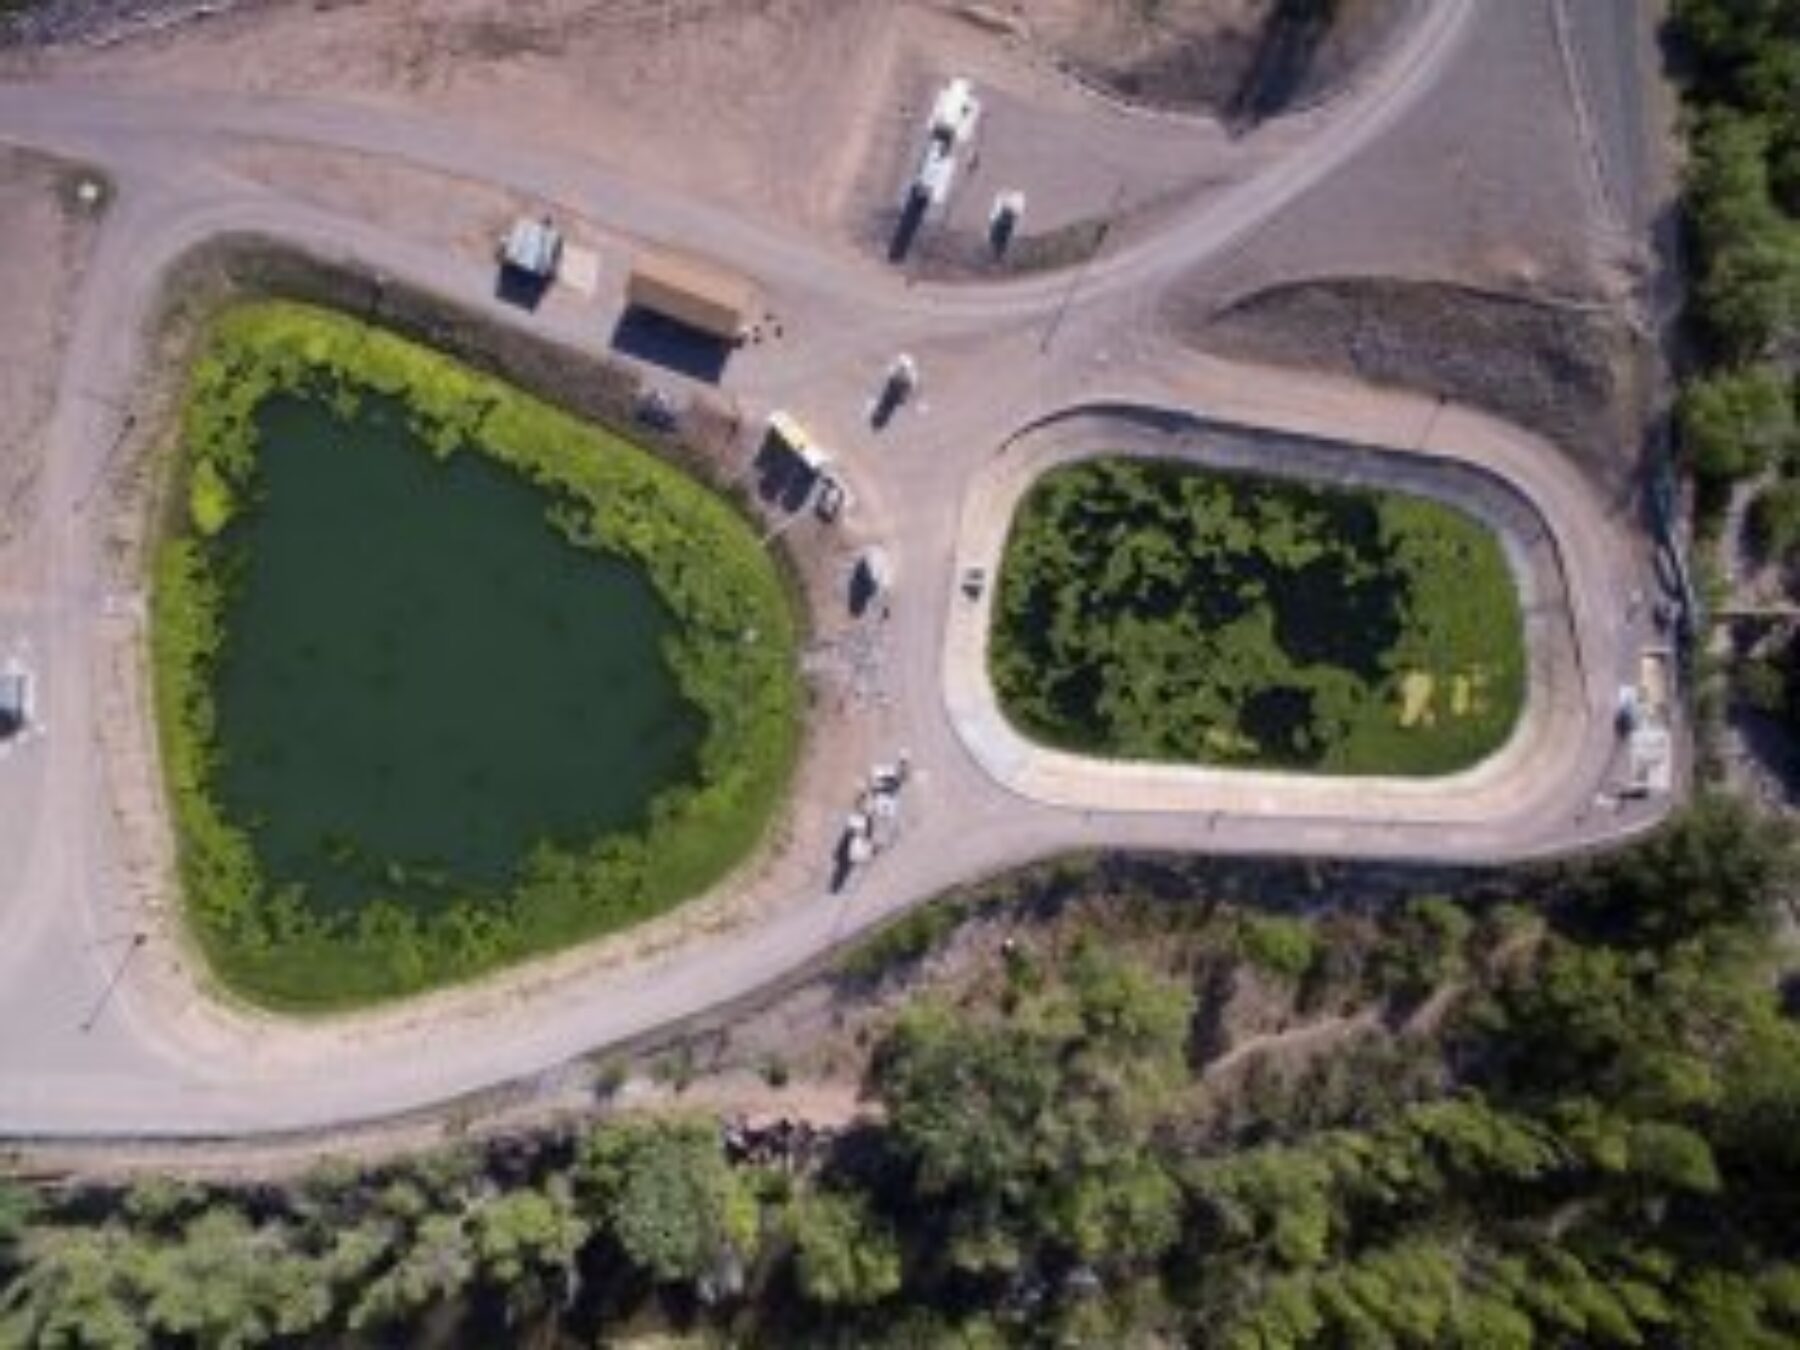 Aerial view of two wastewater treatment lagoons containing algae, service roads and a few buildings surround the lagoons in a climate with deciduous trees.